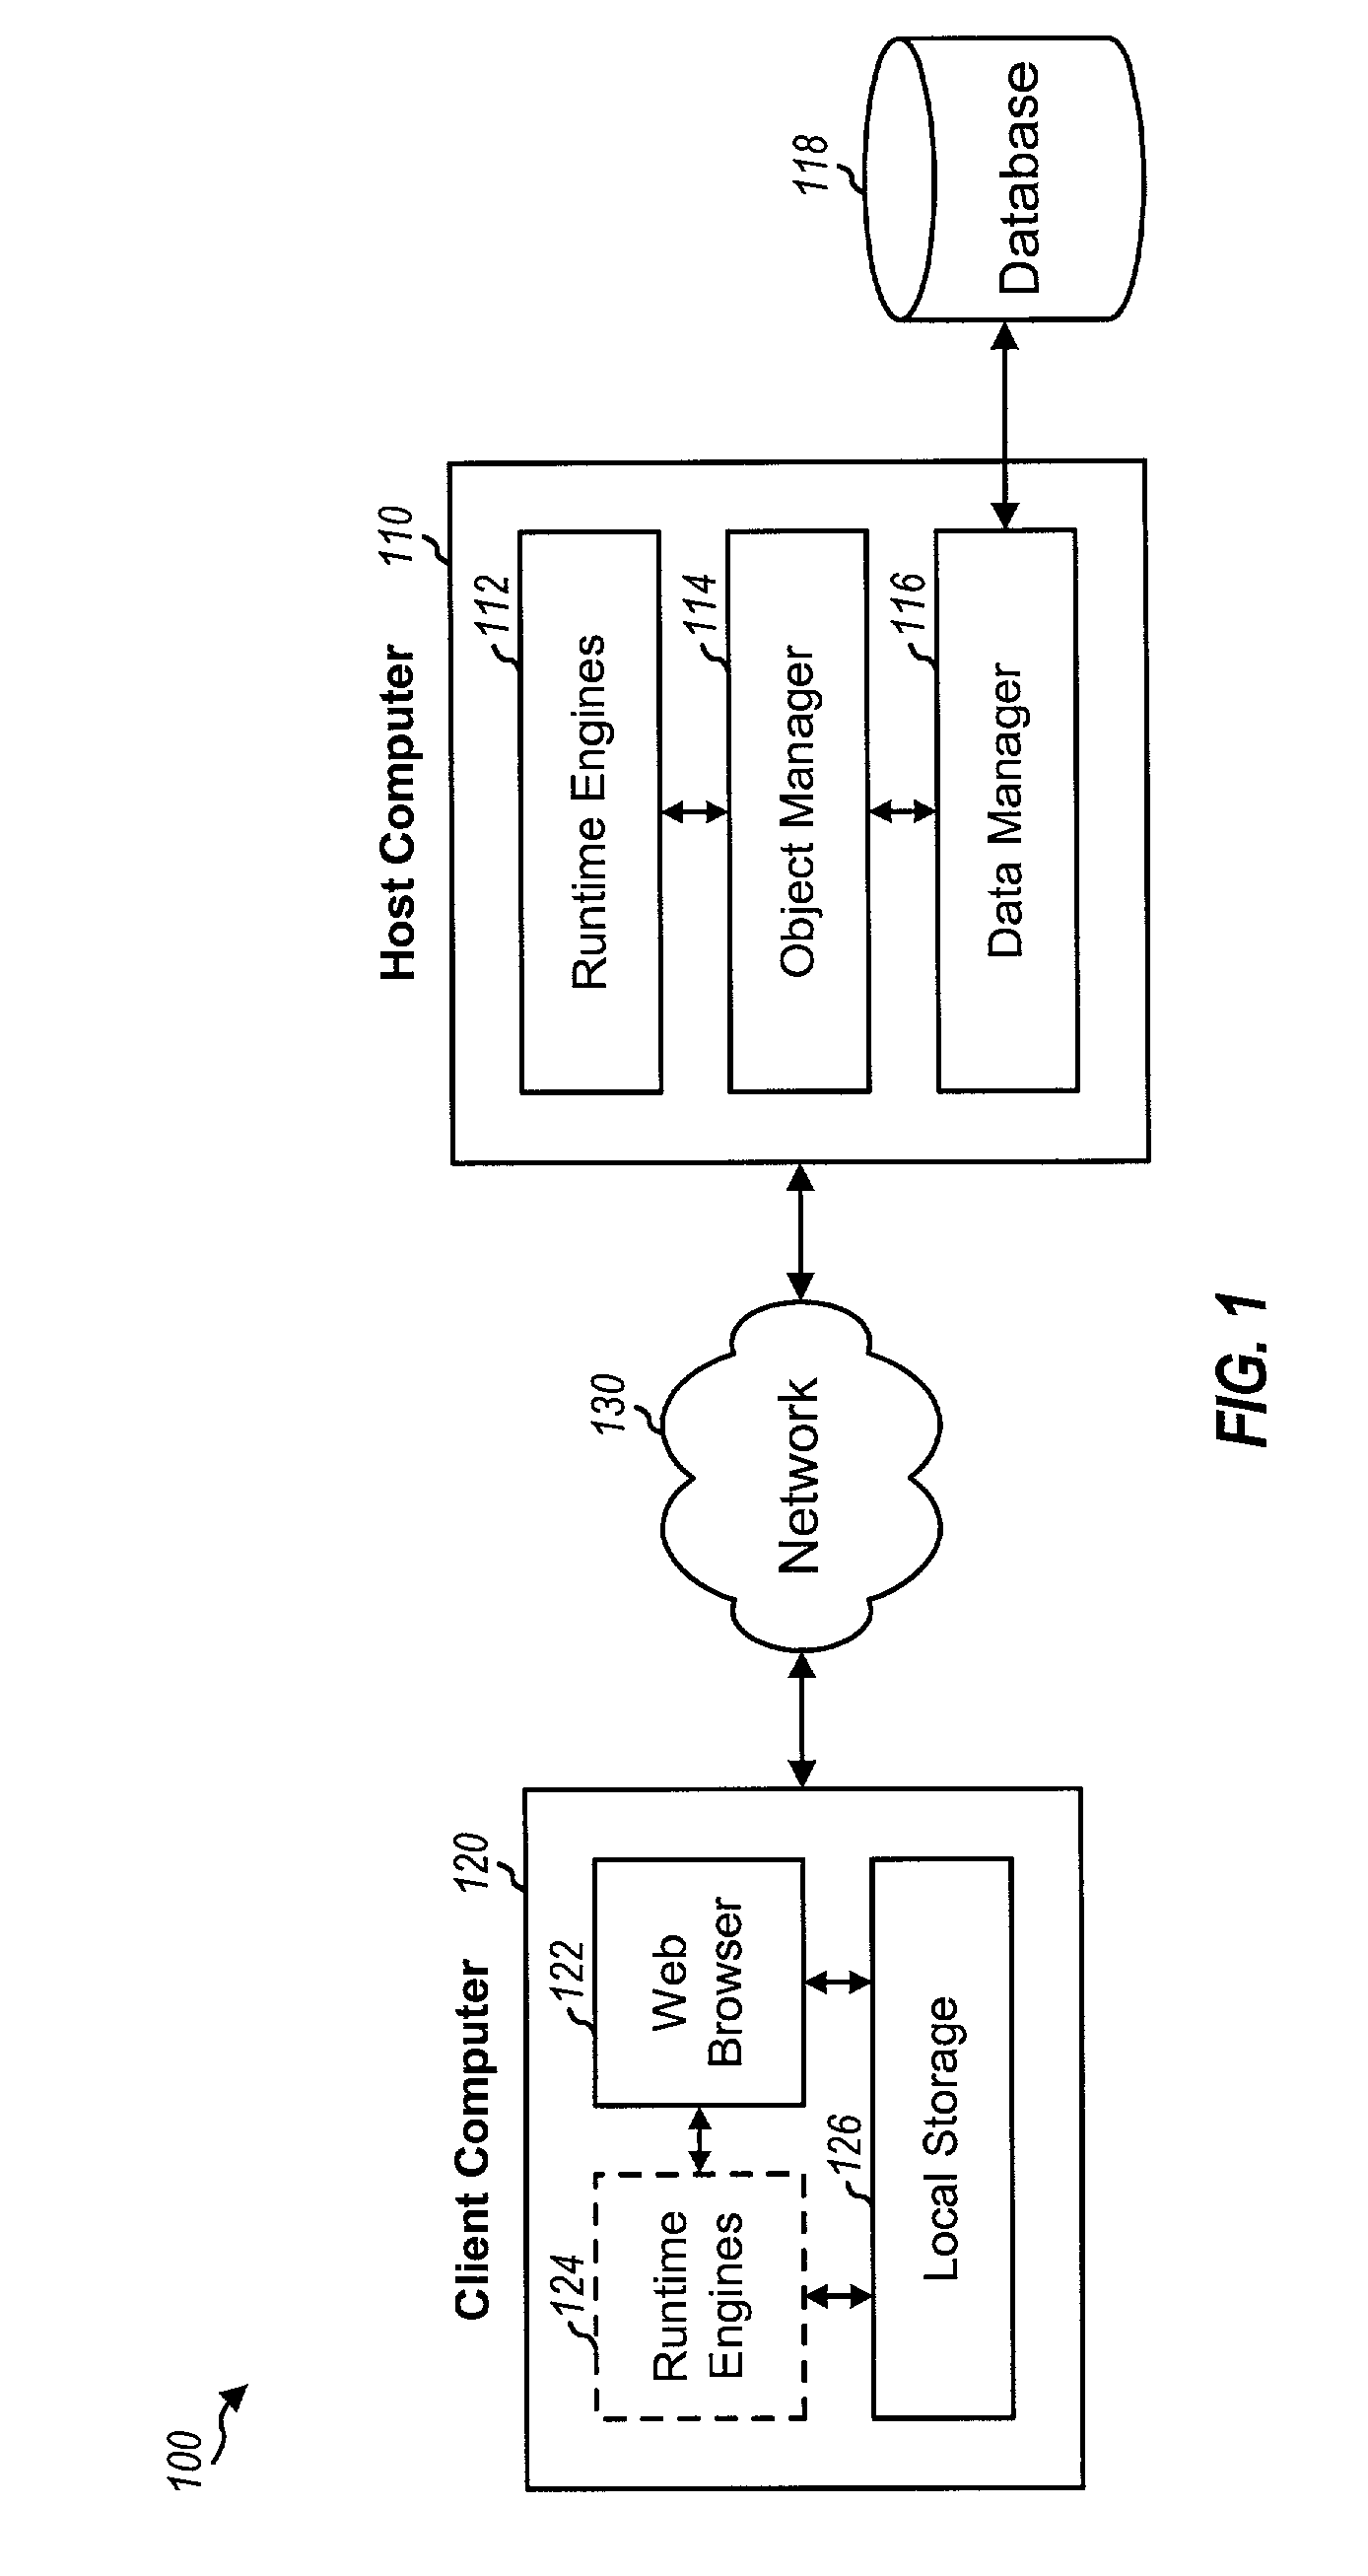 System and method for facilitating user interaction in a browser environment